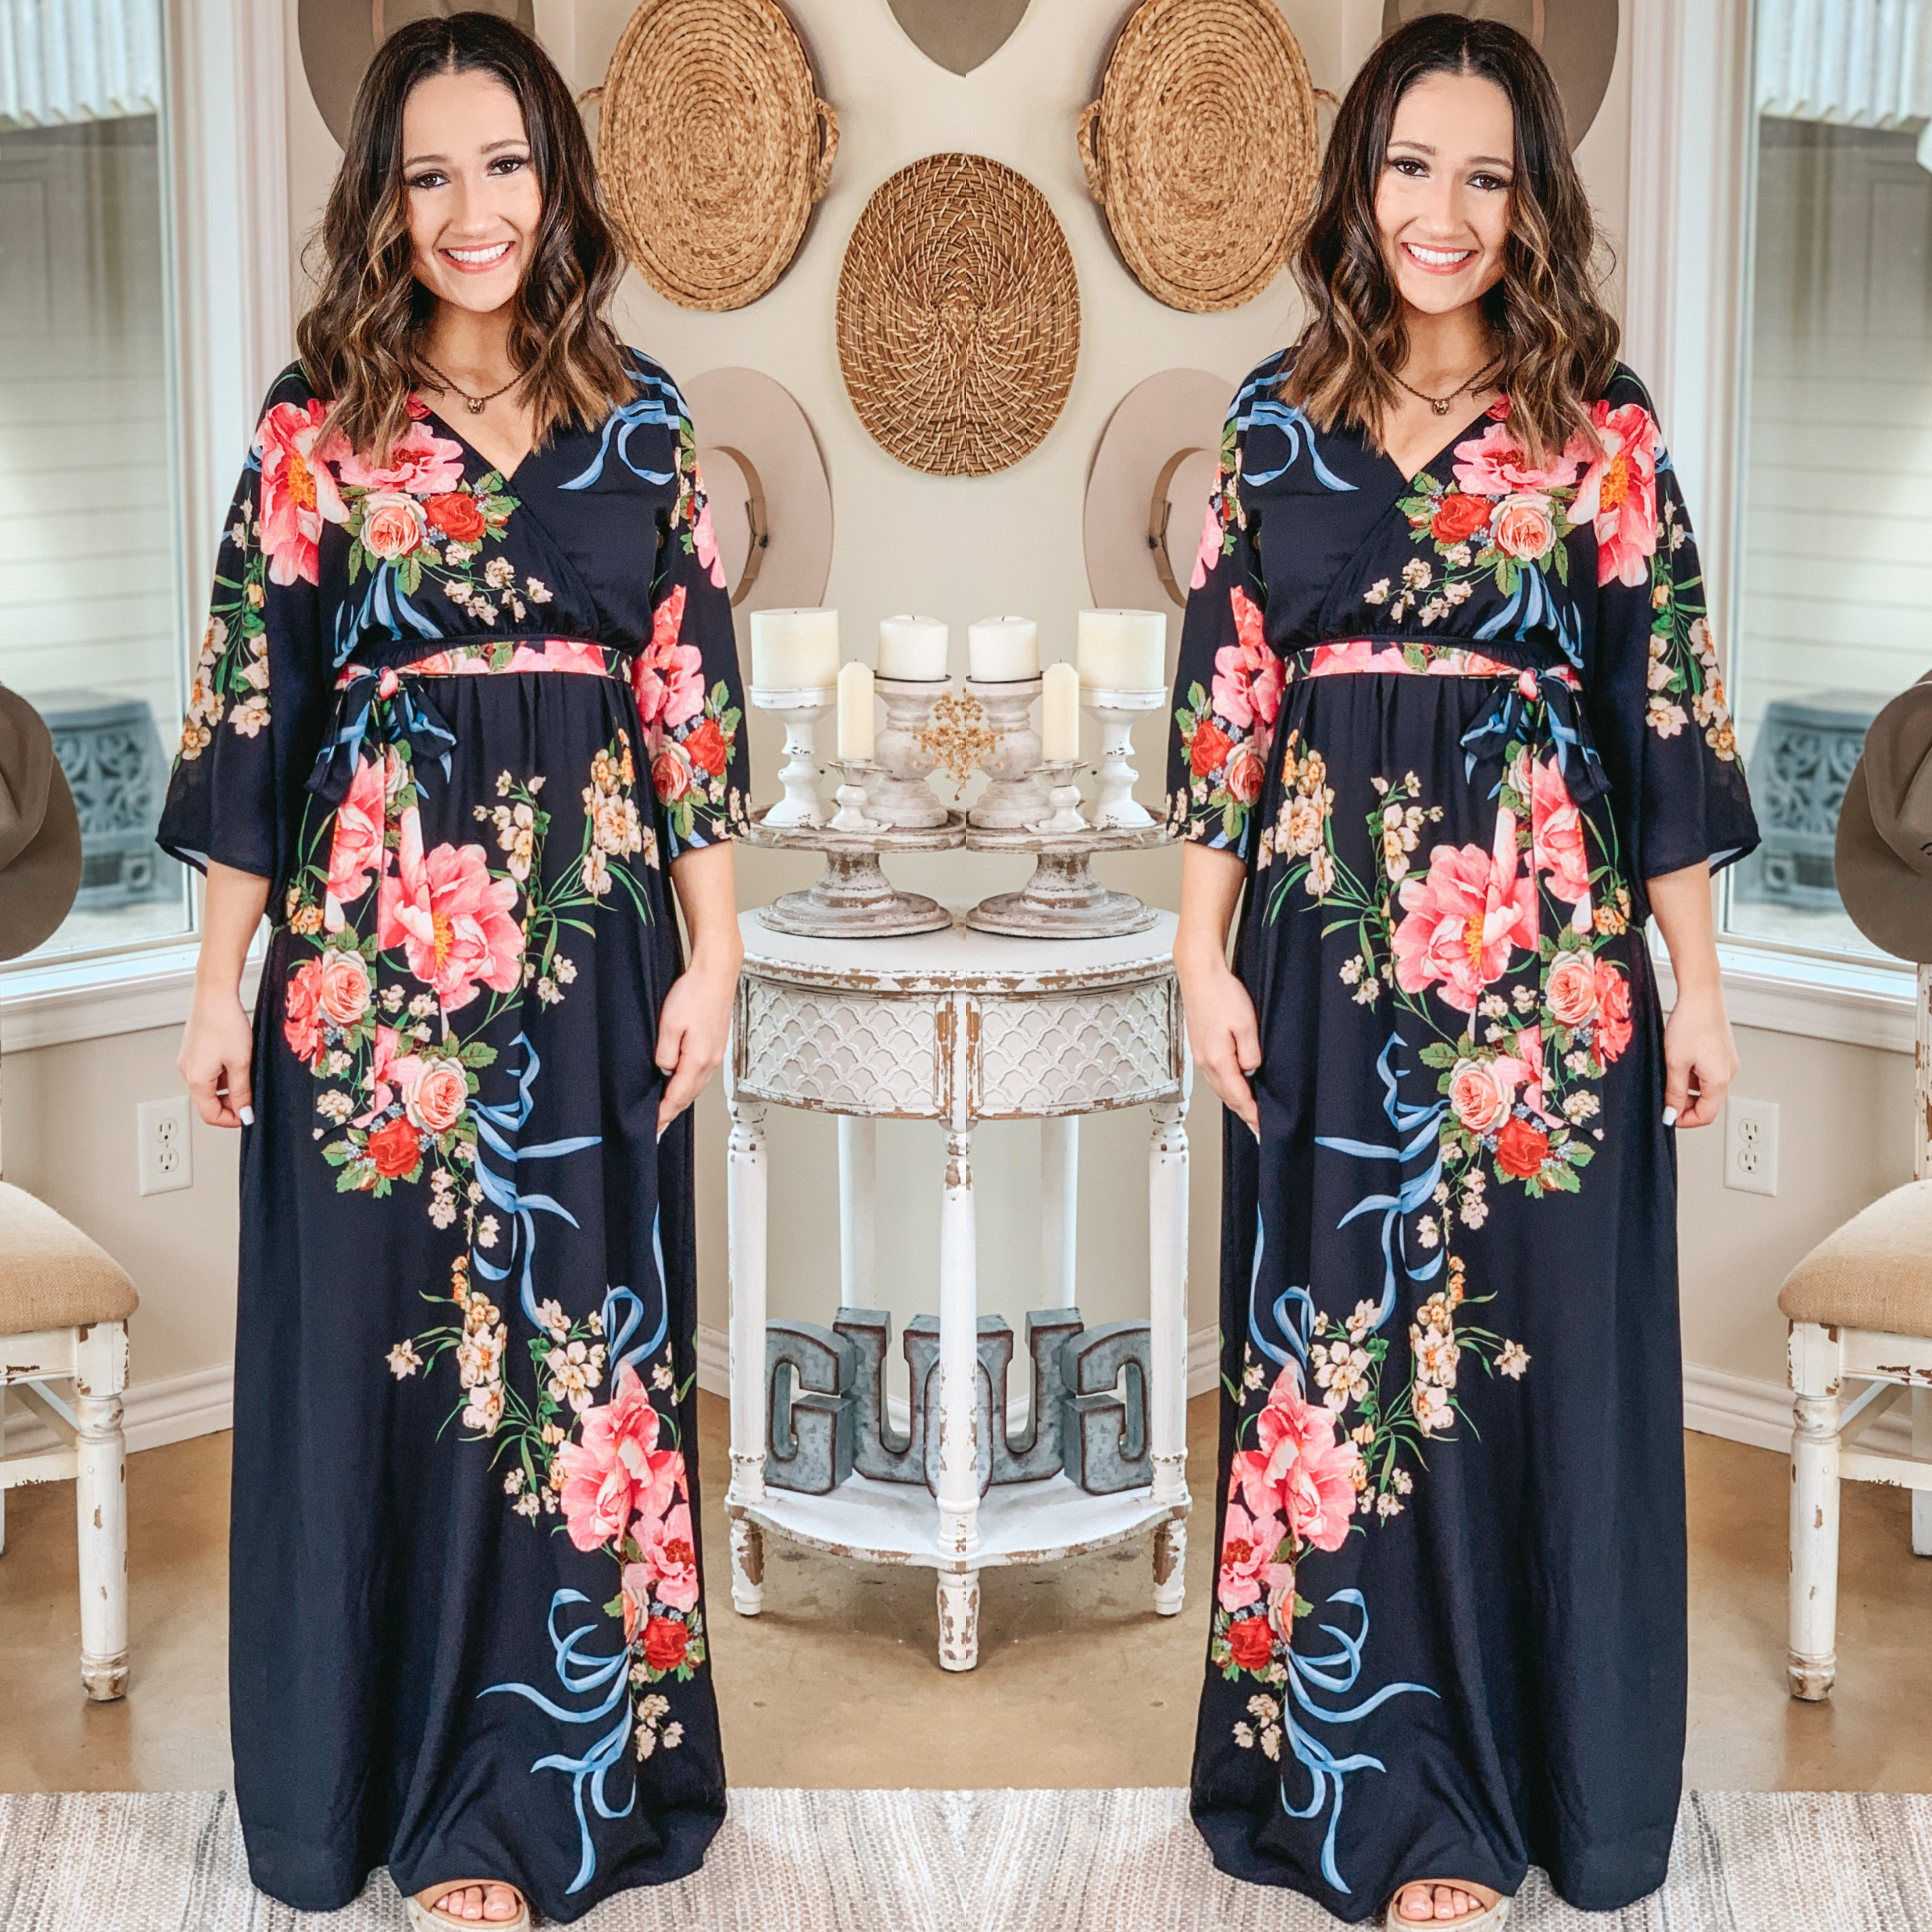 Last Chance Size Small | Dream In Color Floral Print Maxi Dress in Black - Giddy Up Glamour Boutique